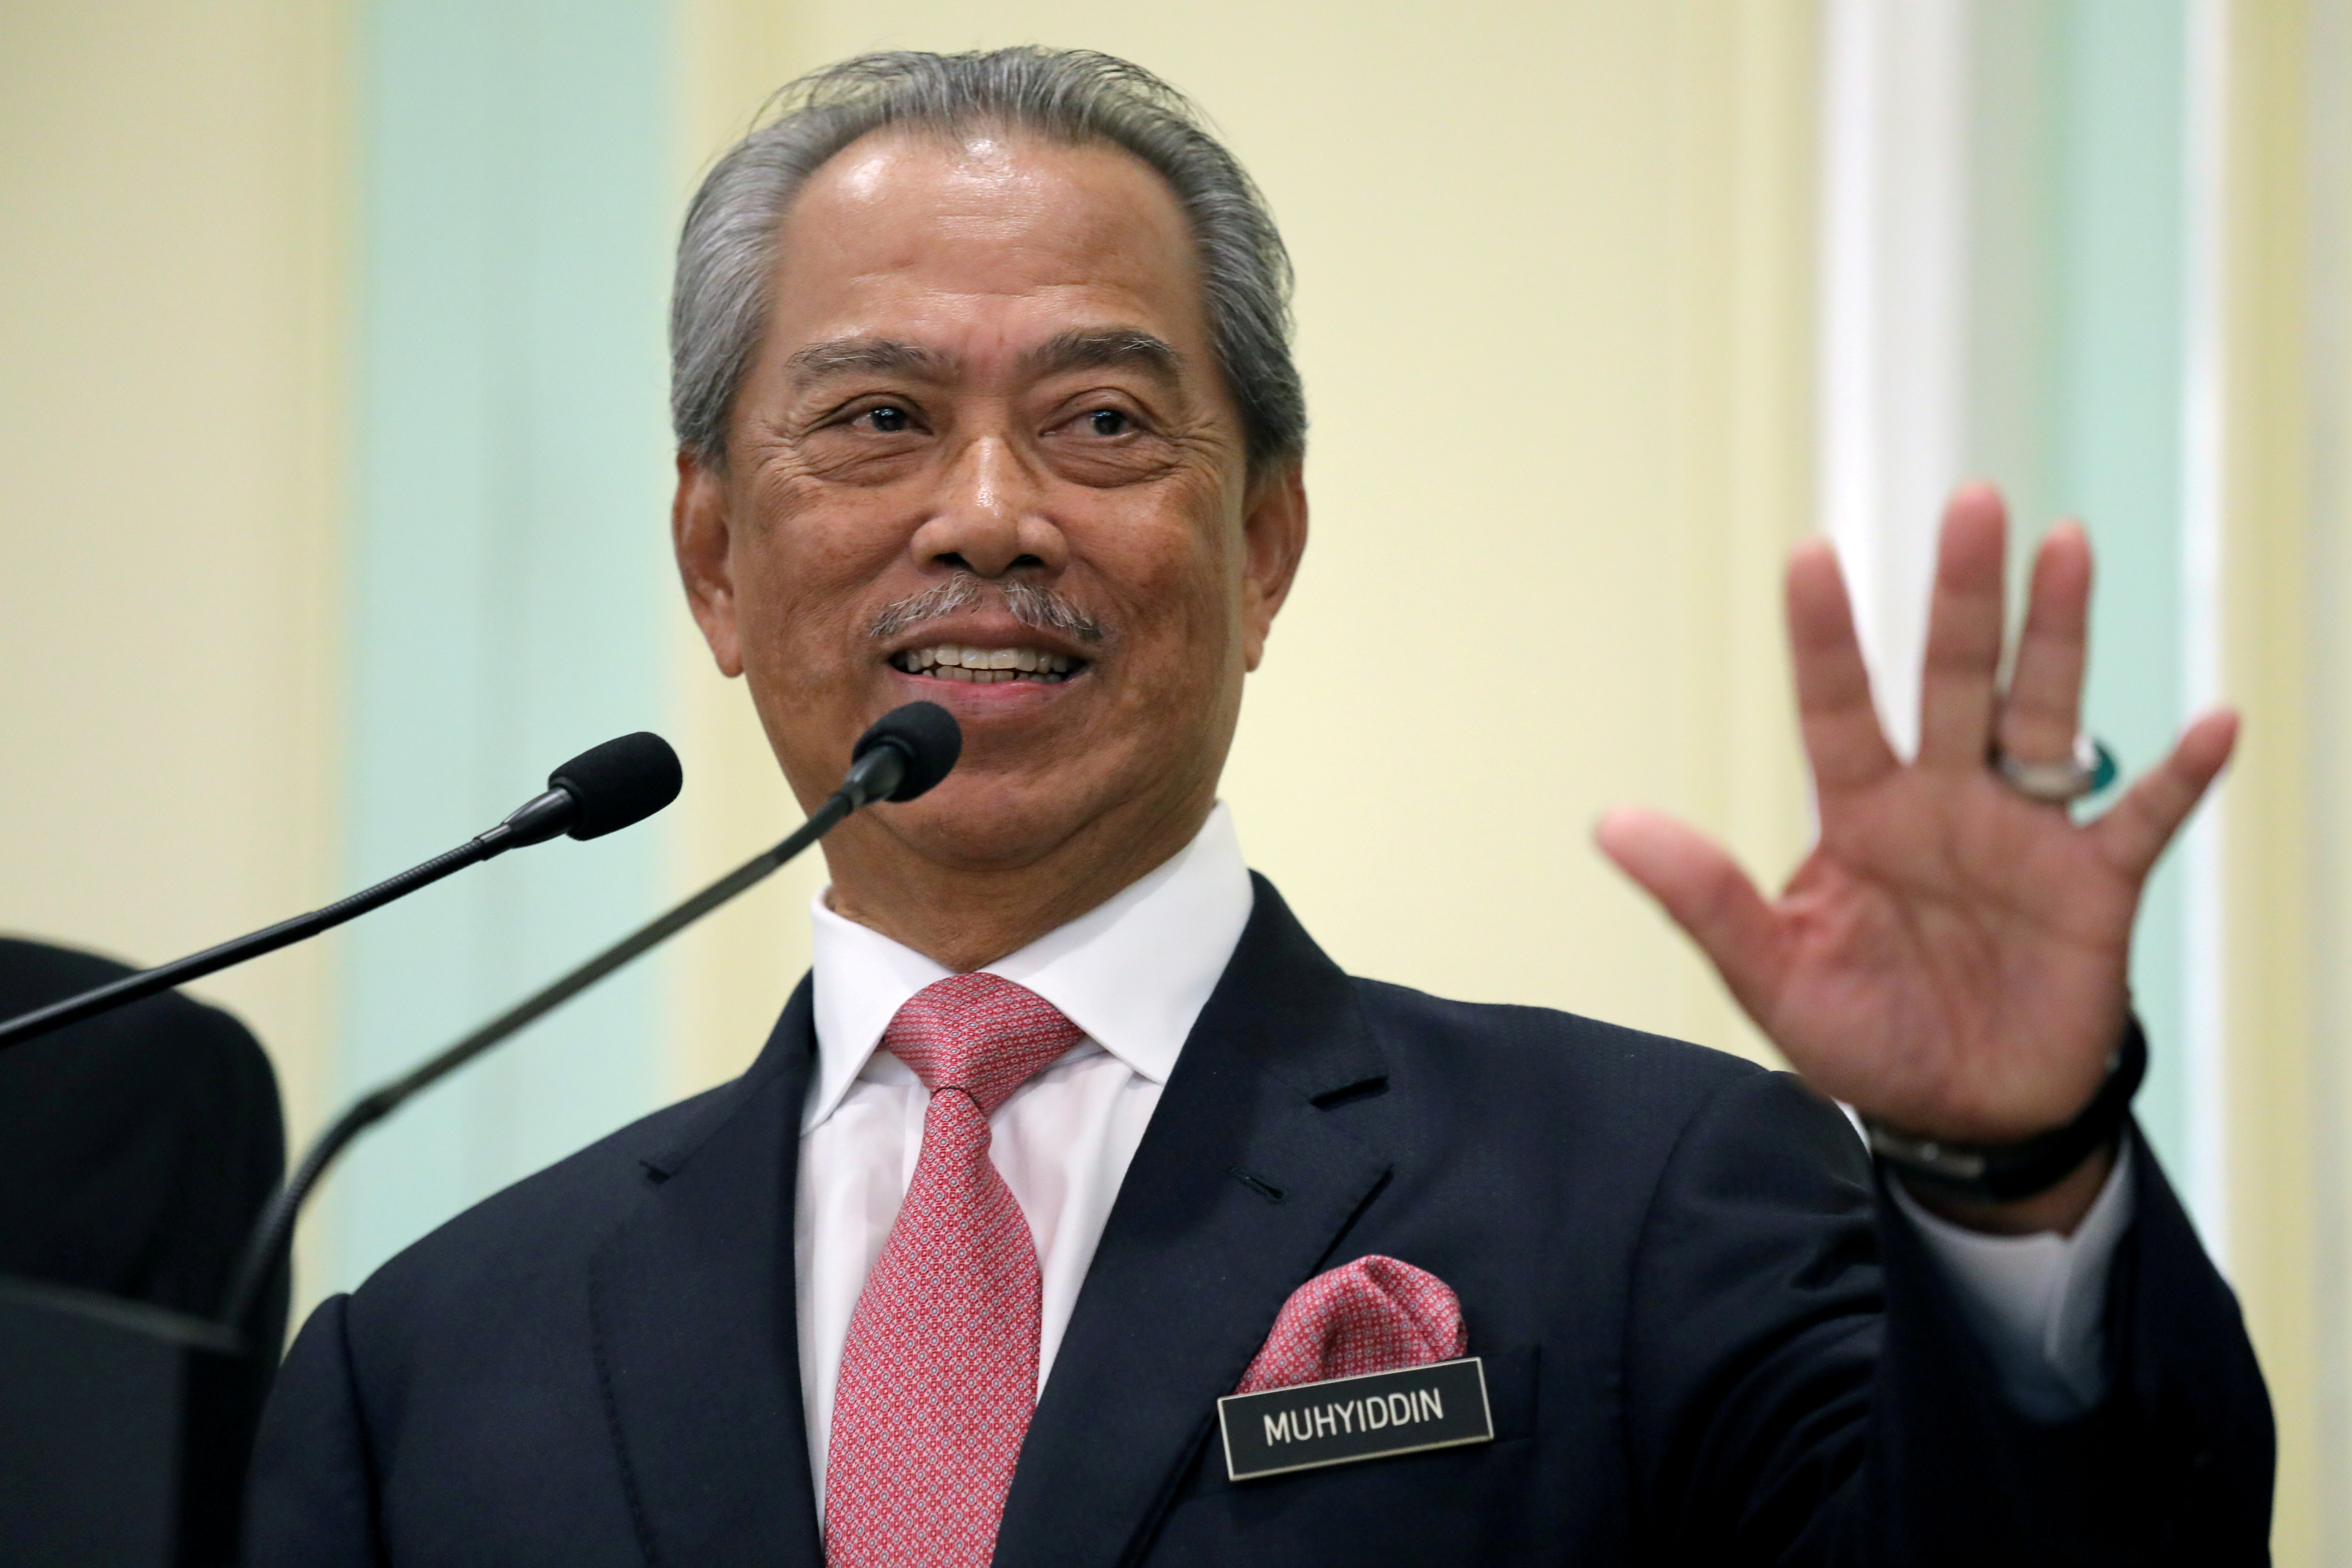 Malaysia's Prime Minister Muhyiddin Yassin speaks during a news conference in Putrajaya